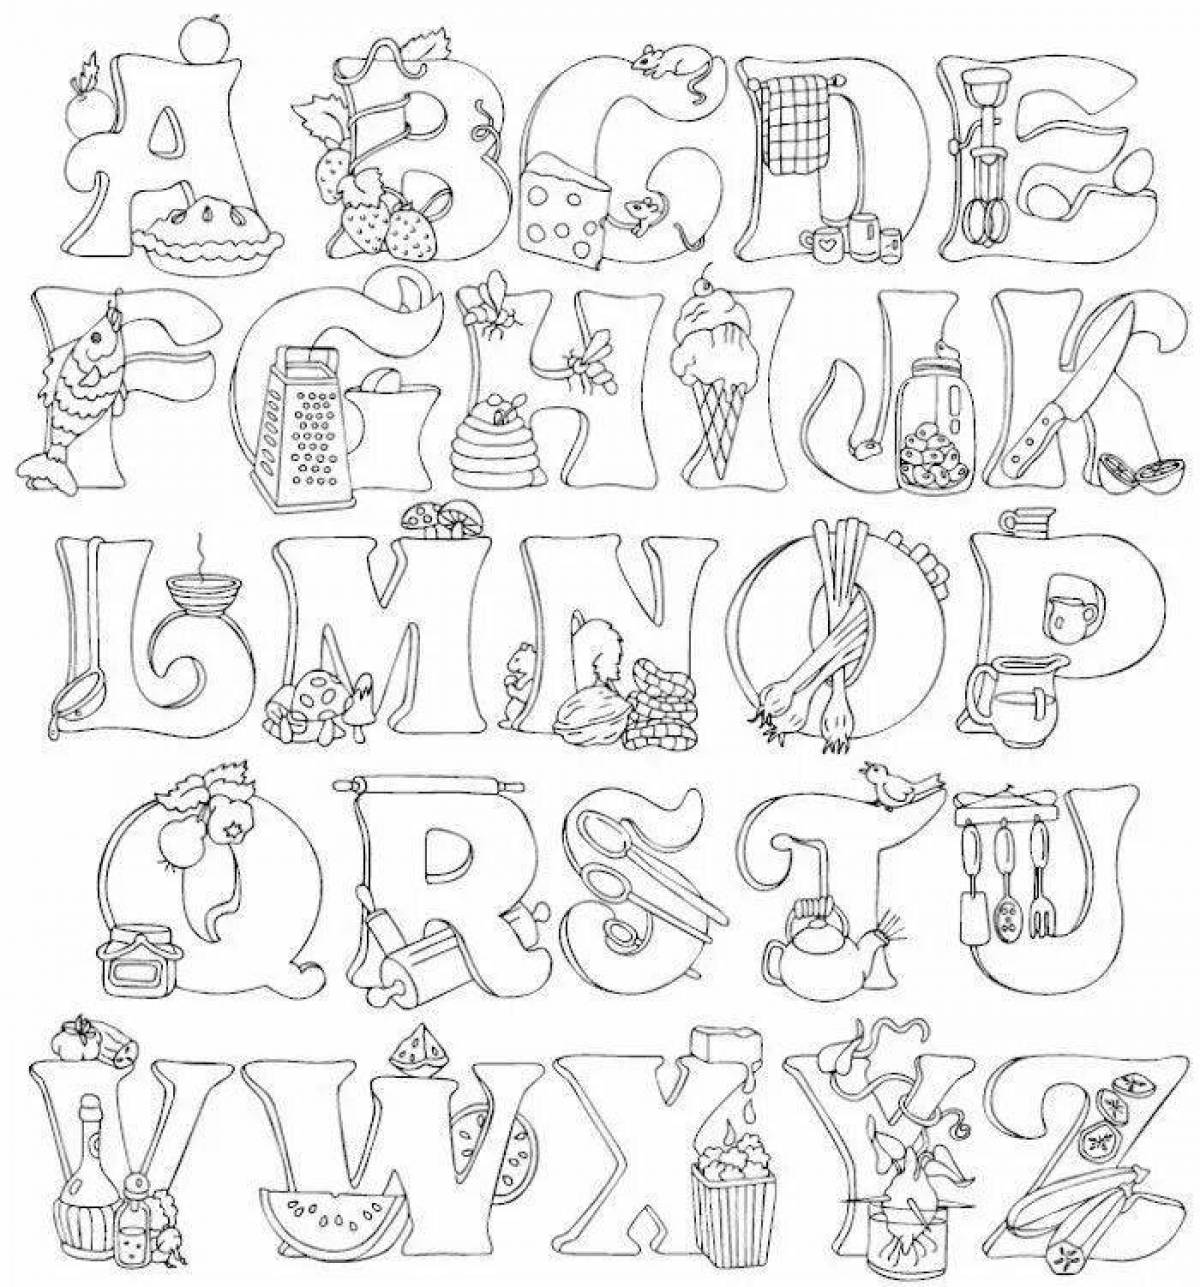 Laura's curvy letters of the alphabet